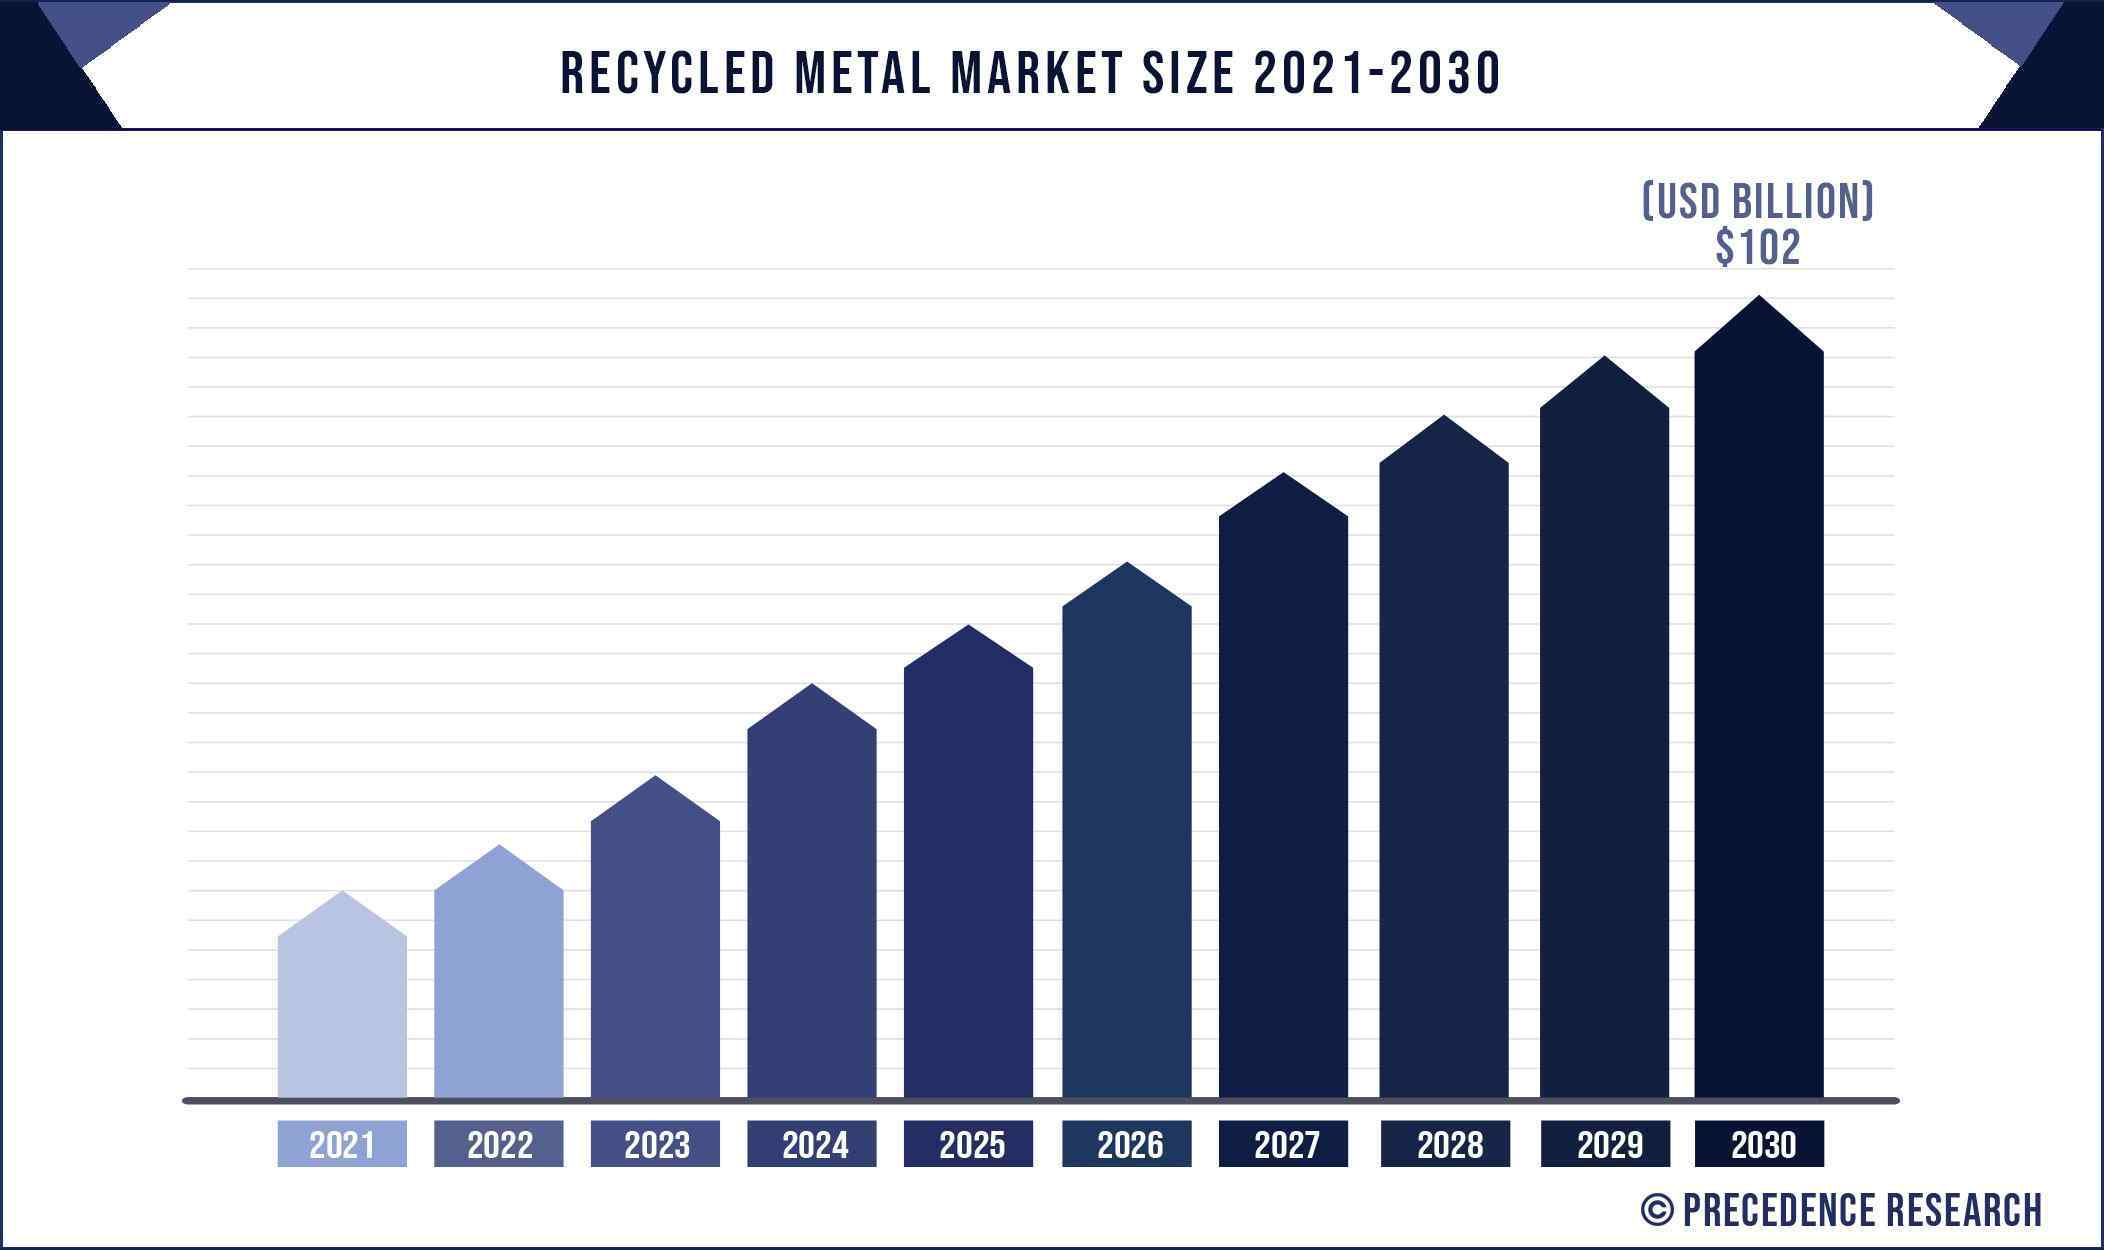 Recycled Metal Market Size 2021 to 2030